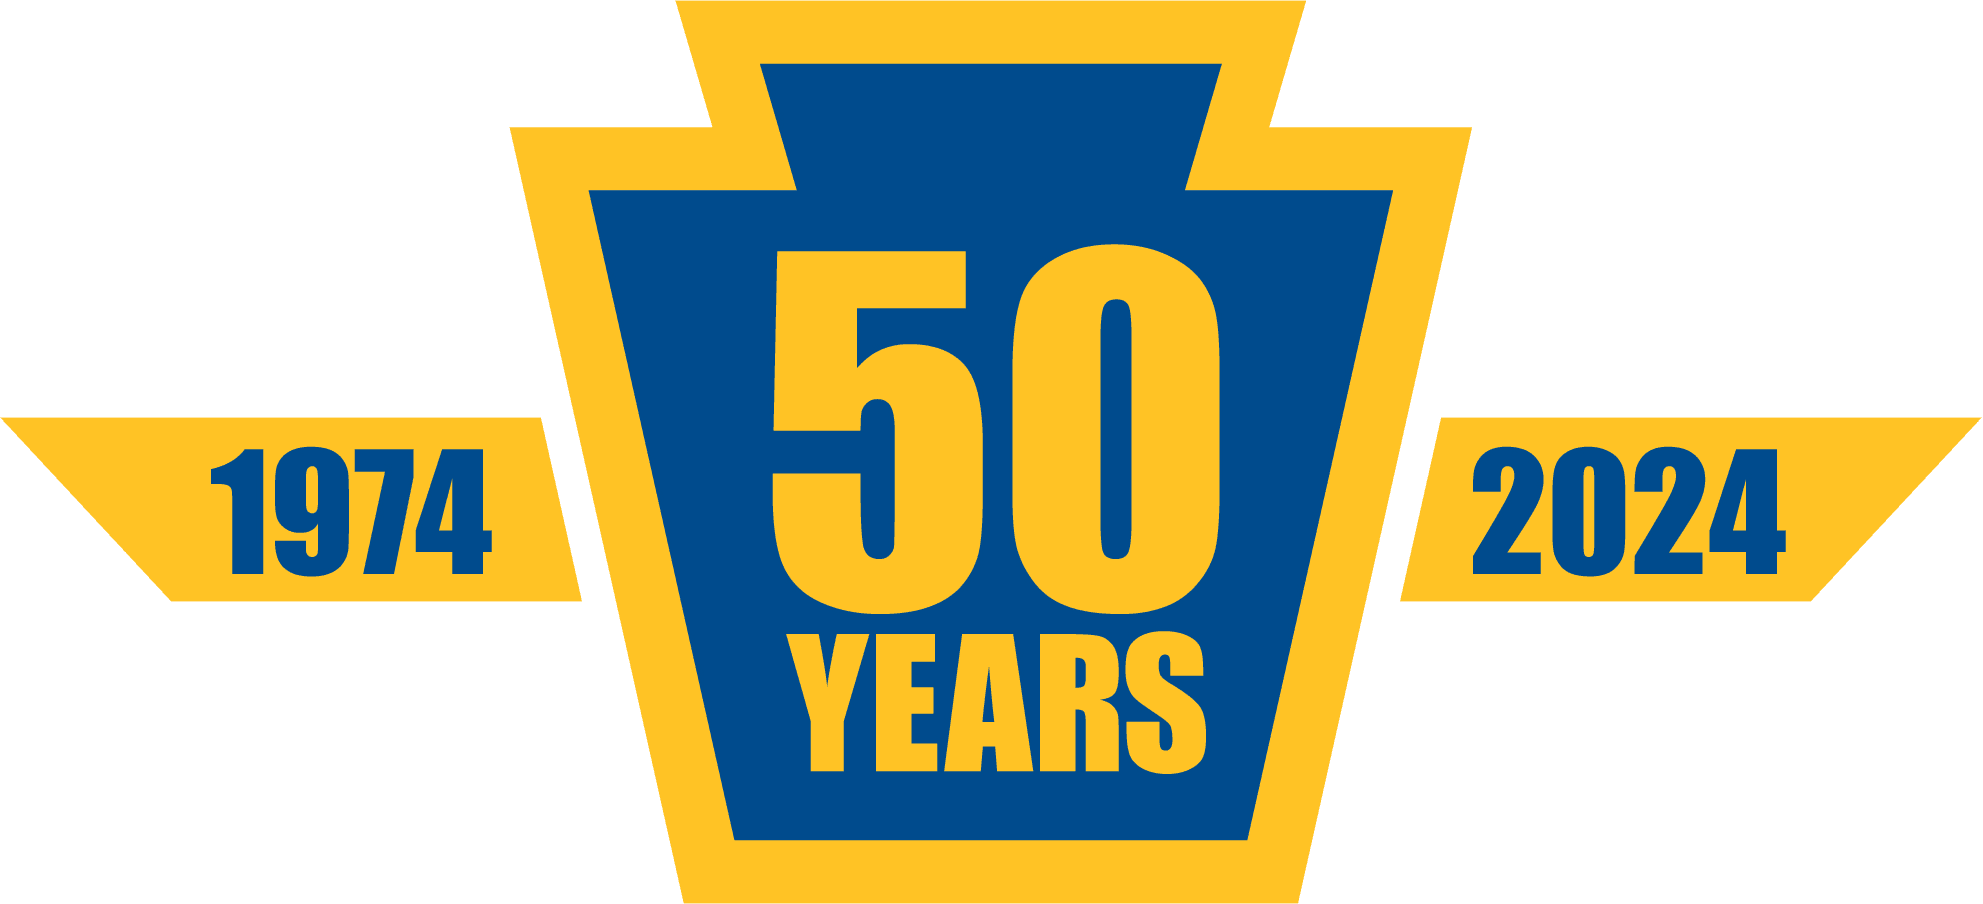 Bedford blue and yellow 50th year anniversary logo with the years 1974 to 2024.